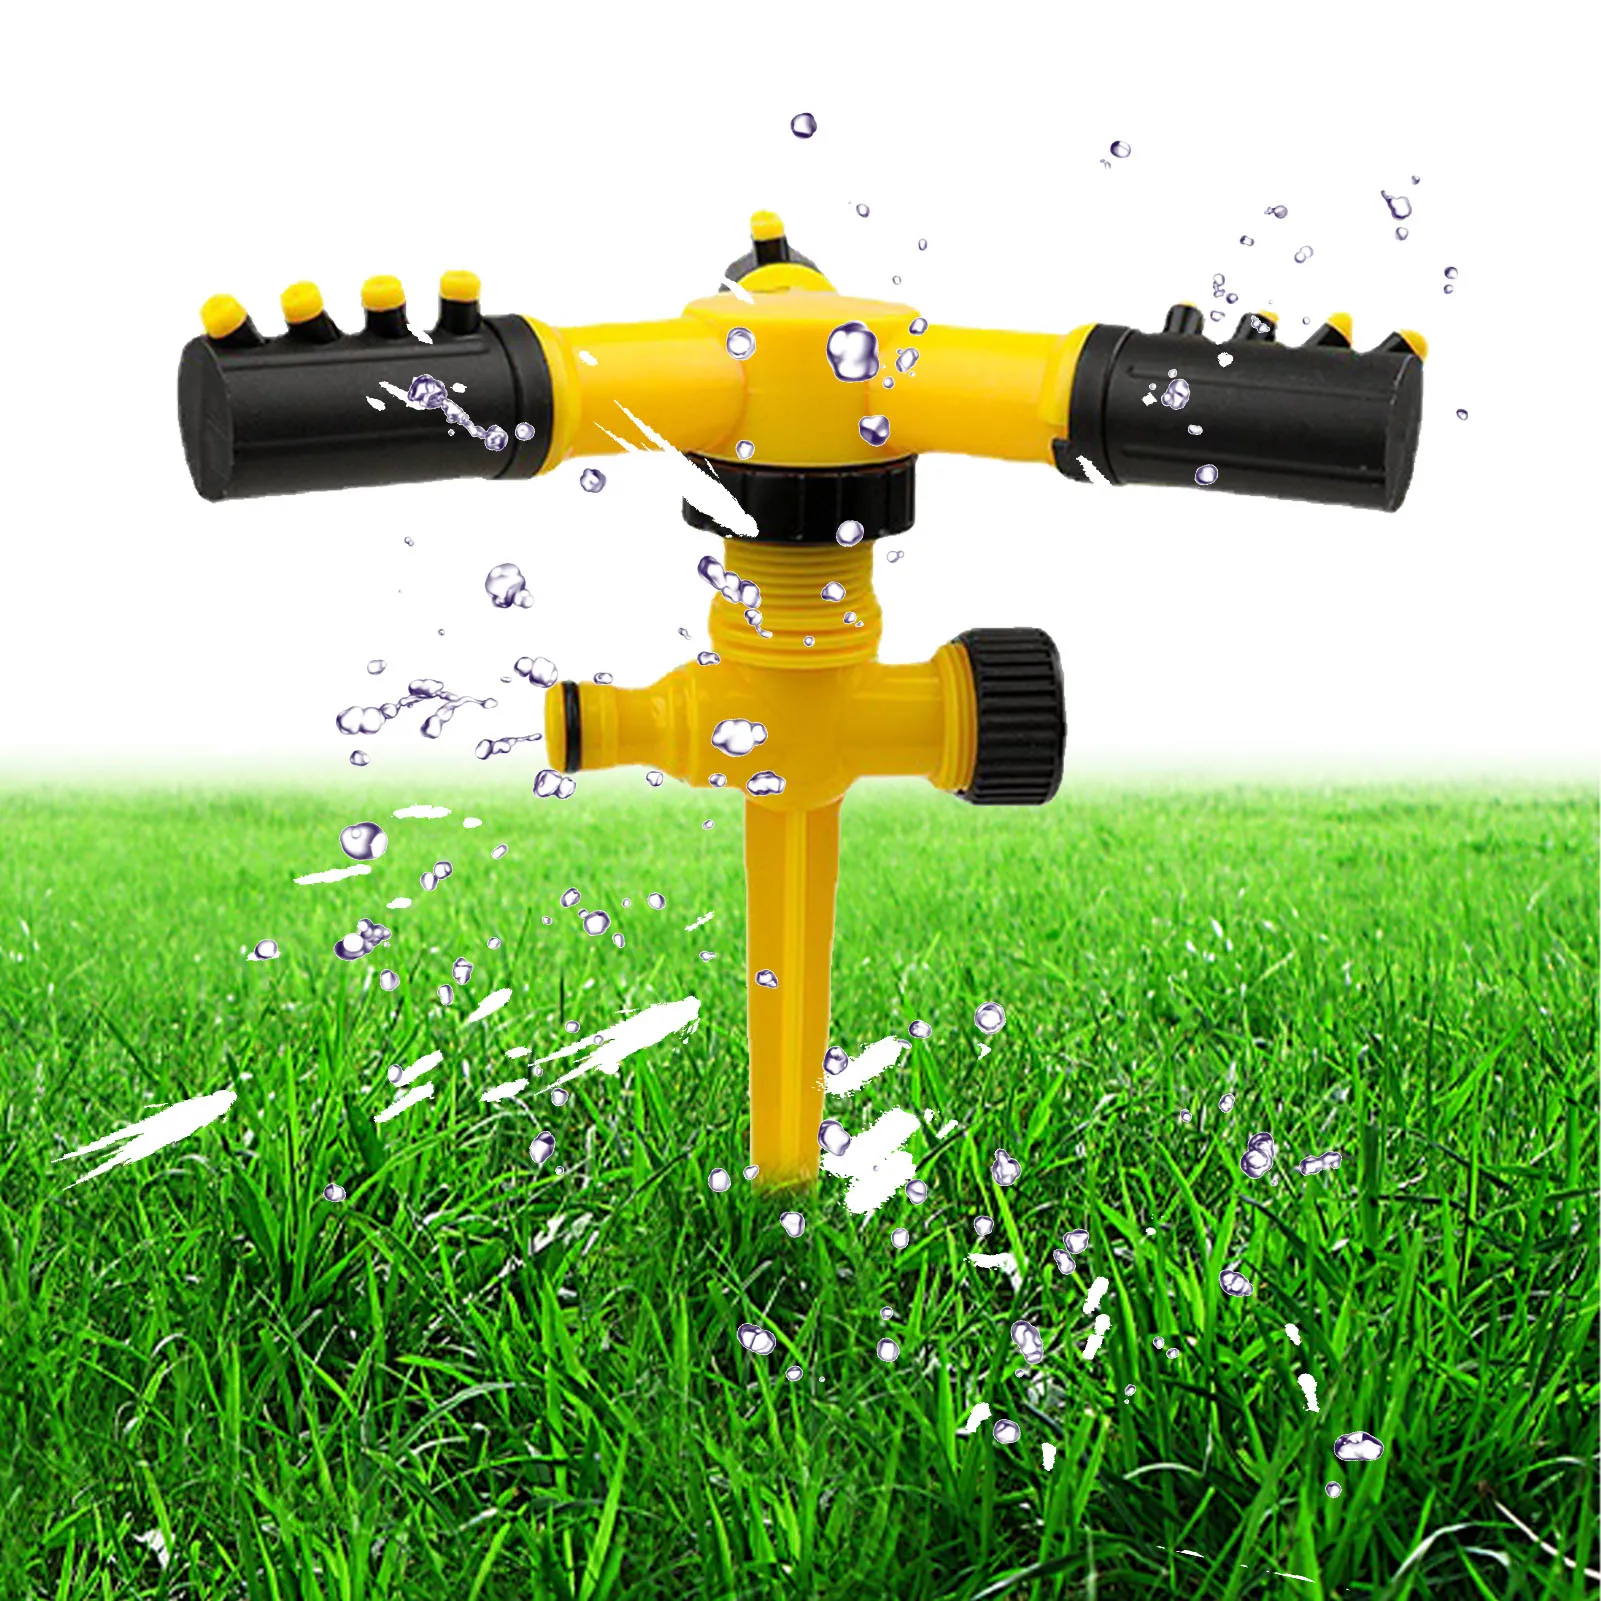 

Water Sprinkler For Lawn 360 Degree Rotating Lawn Sprinkler Plug-in Lawn Sprinklers For Hoses Large And Small Areas Hose